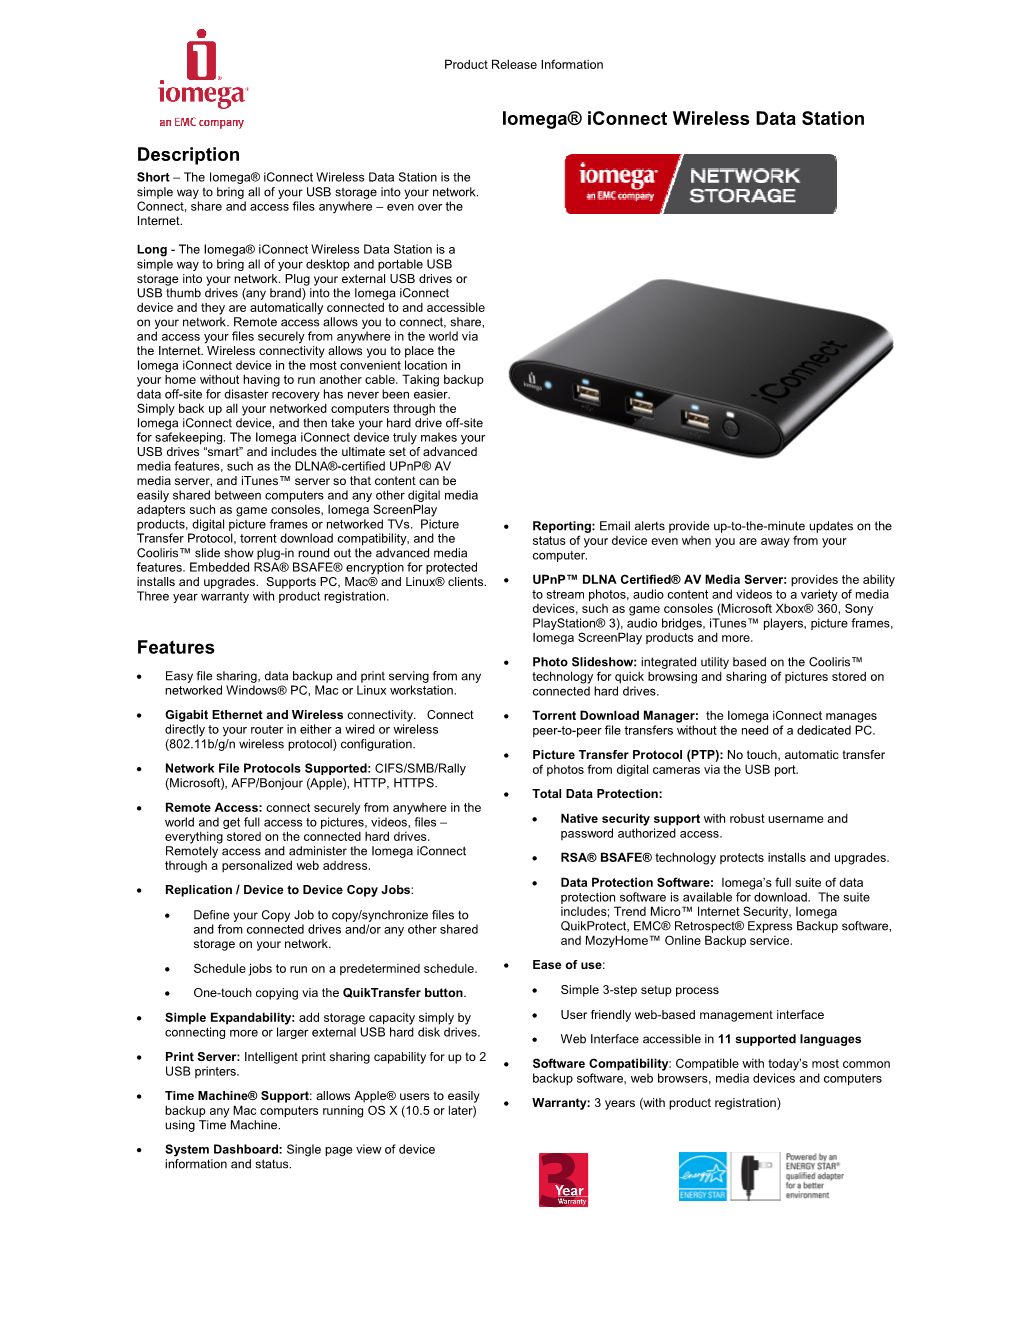 Iomega® Iconnect Wireless Data Station Description Features